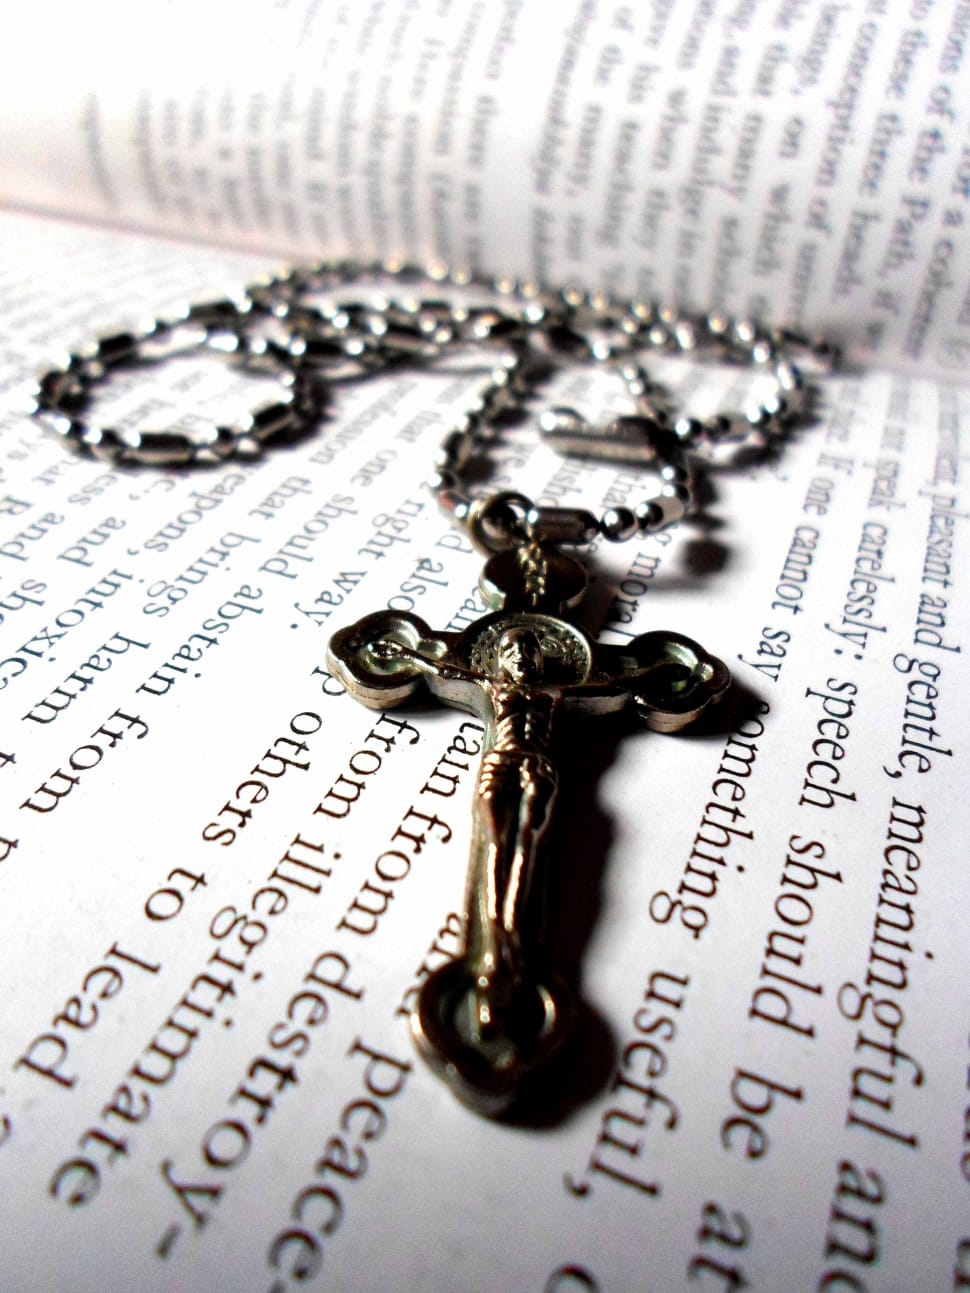 silver crucifix pendant necklace on book preview